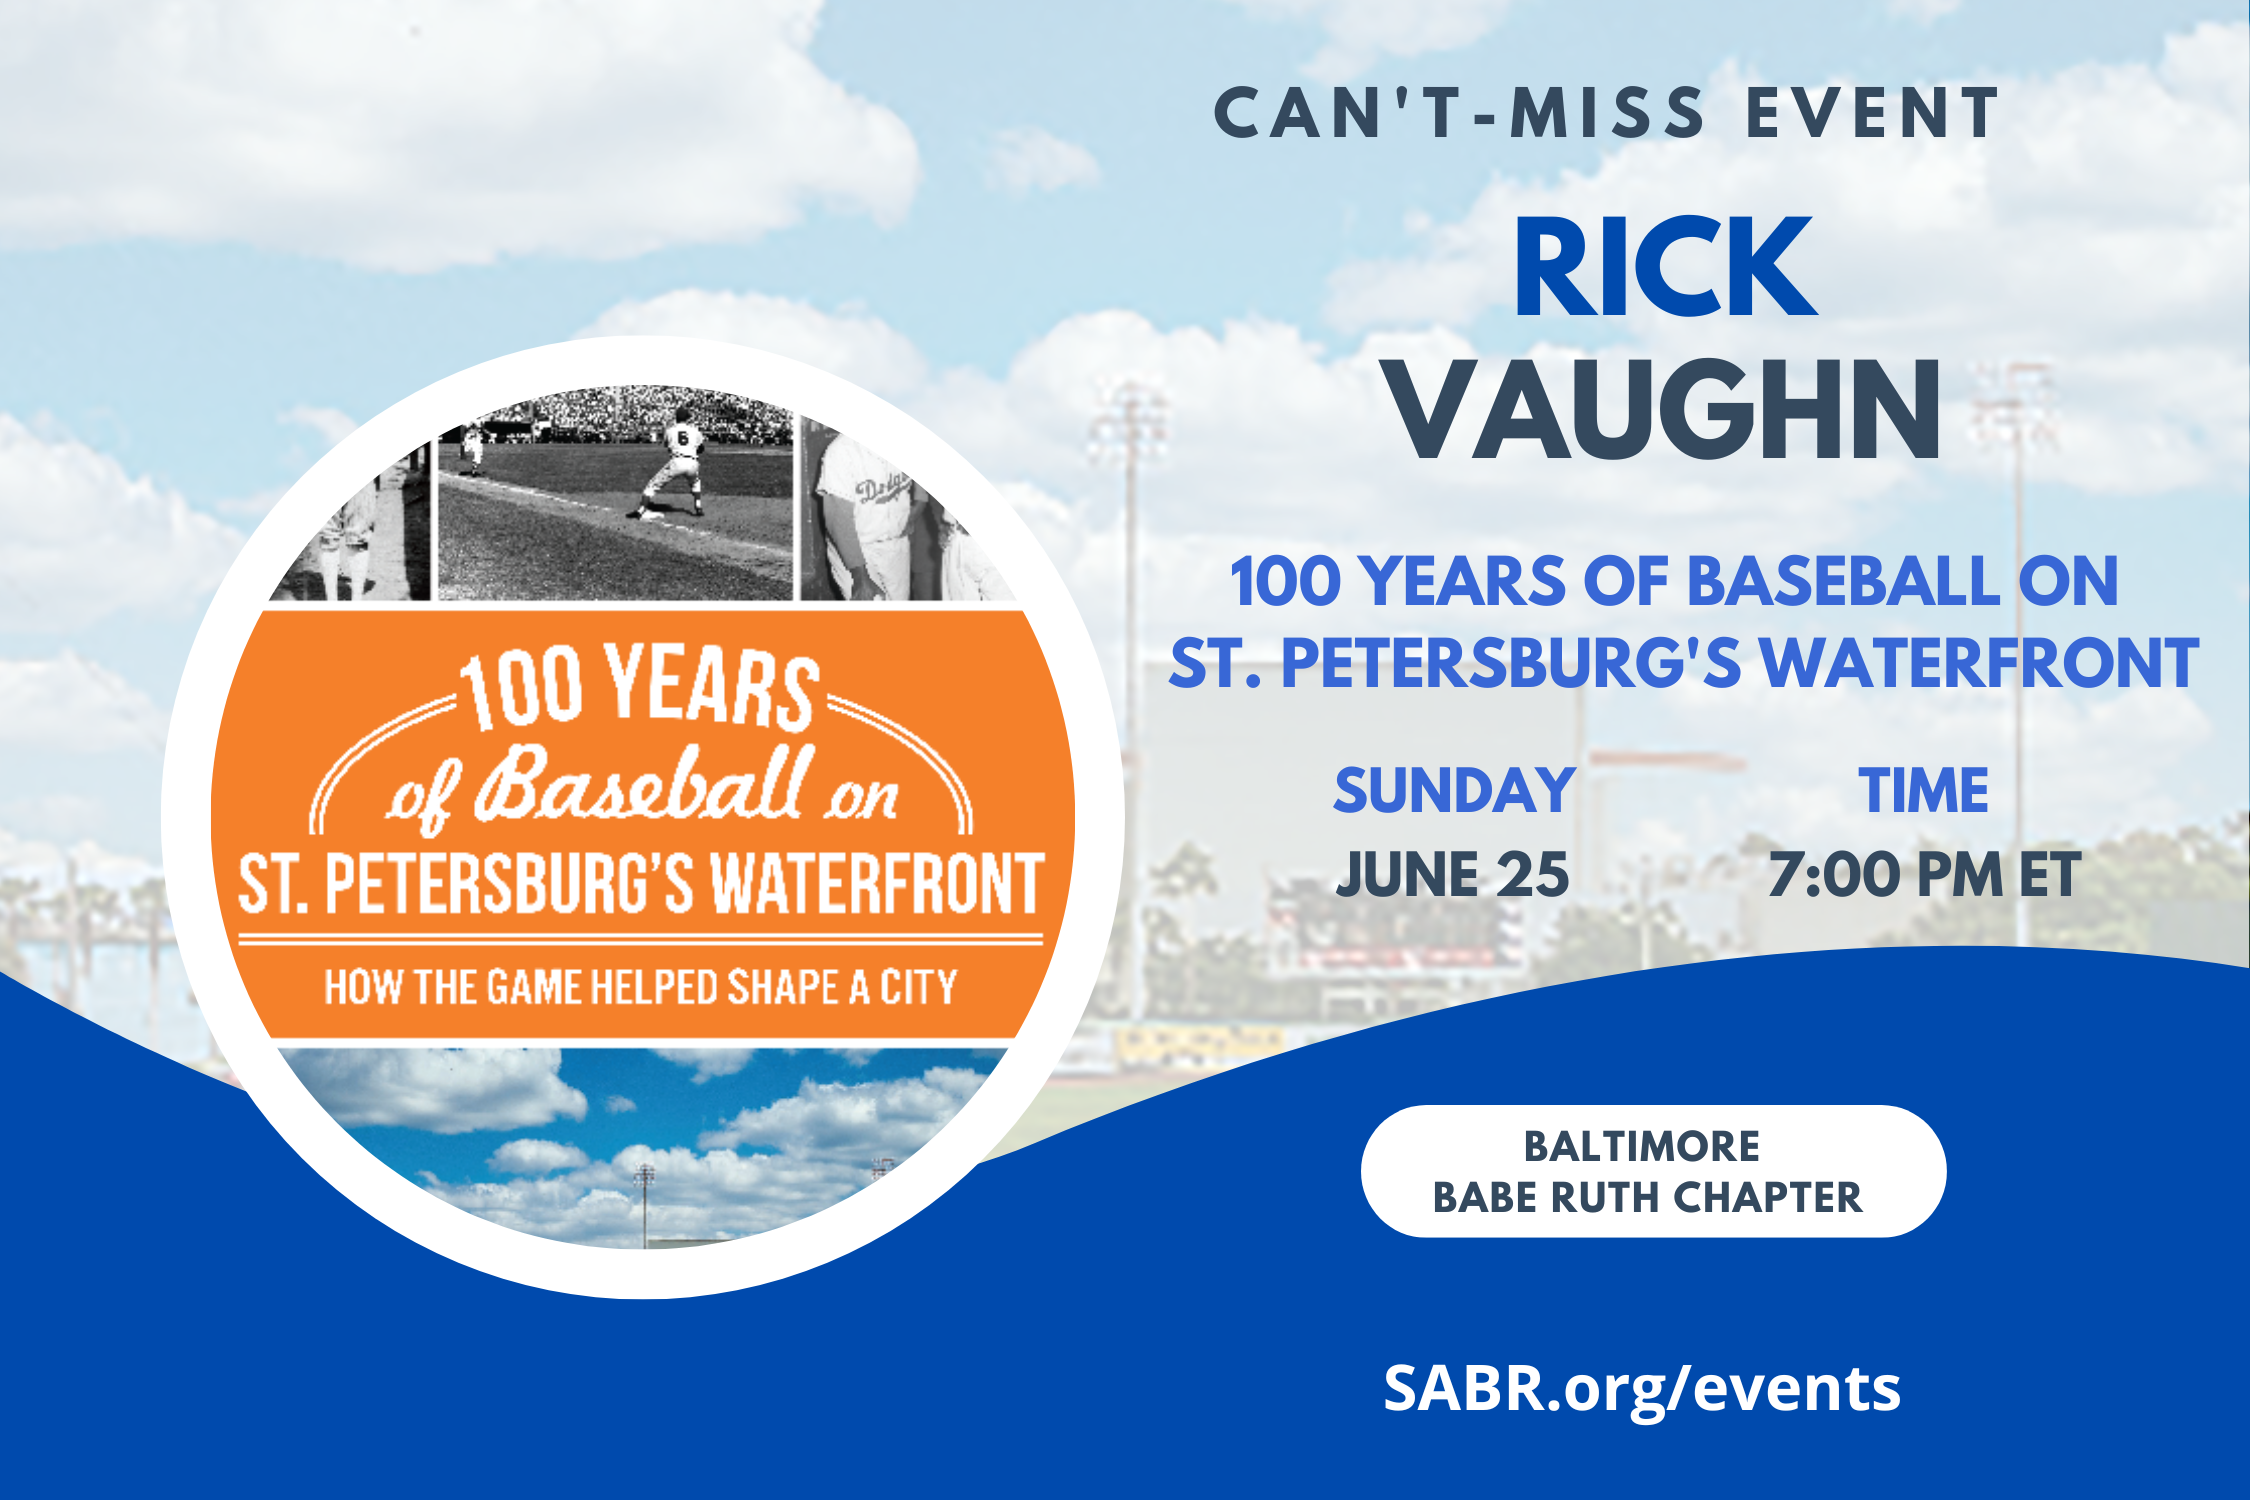 On Sunday, June 25 at 7 p.m. Eastern Time, join SABR's Baltimore Babe Ruth Chapter for a virtual Baseball Babble meeting! All baseball fans are welcome to attend. Author Rick Vaughn will discuss his book 100 Years of Baseball on St. Petersburg's Waterfront: How the Game Helped Shape a City.